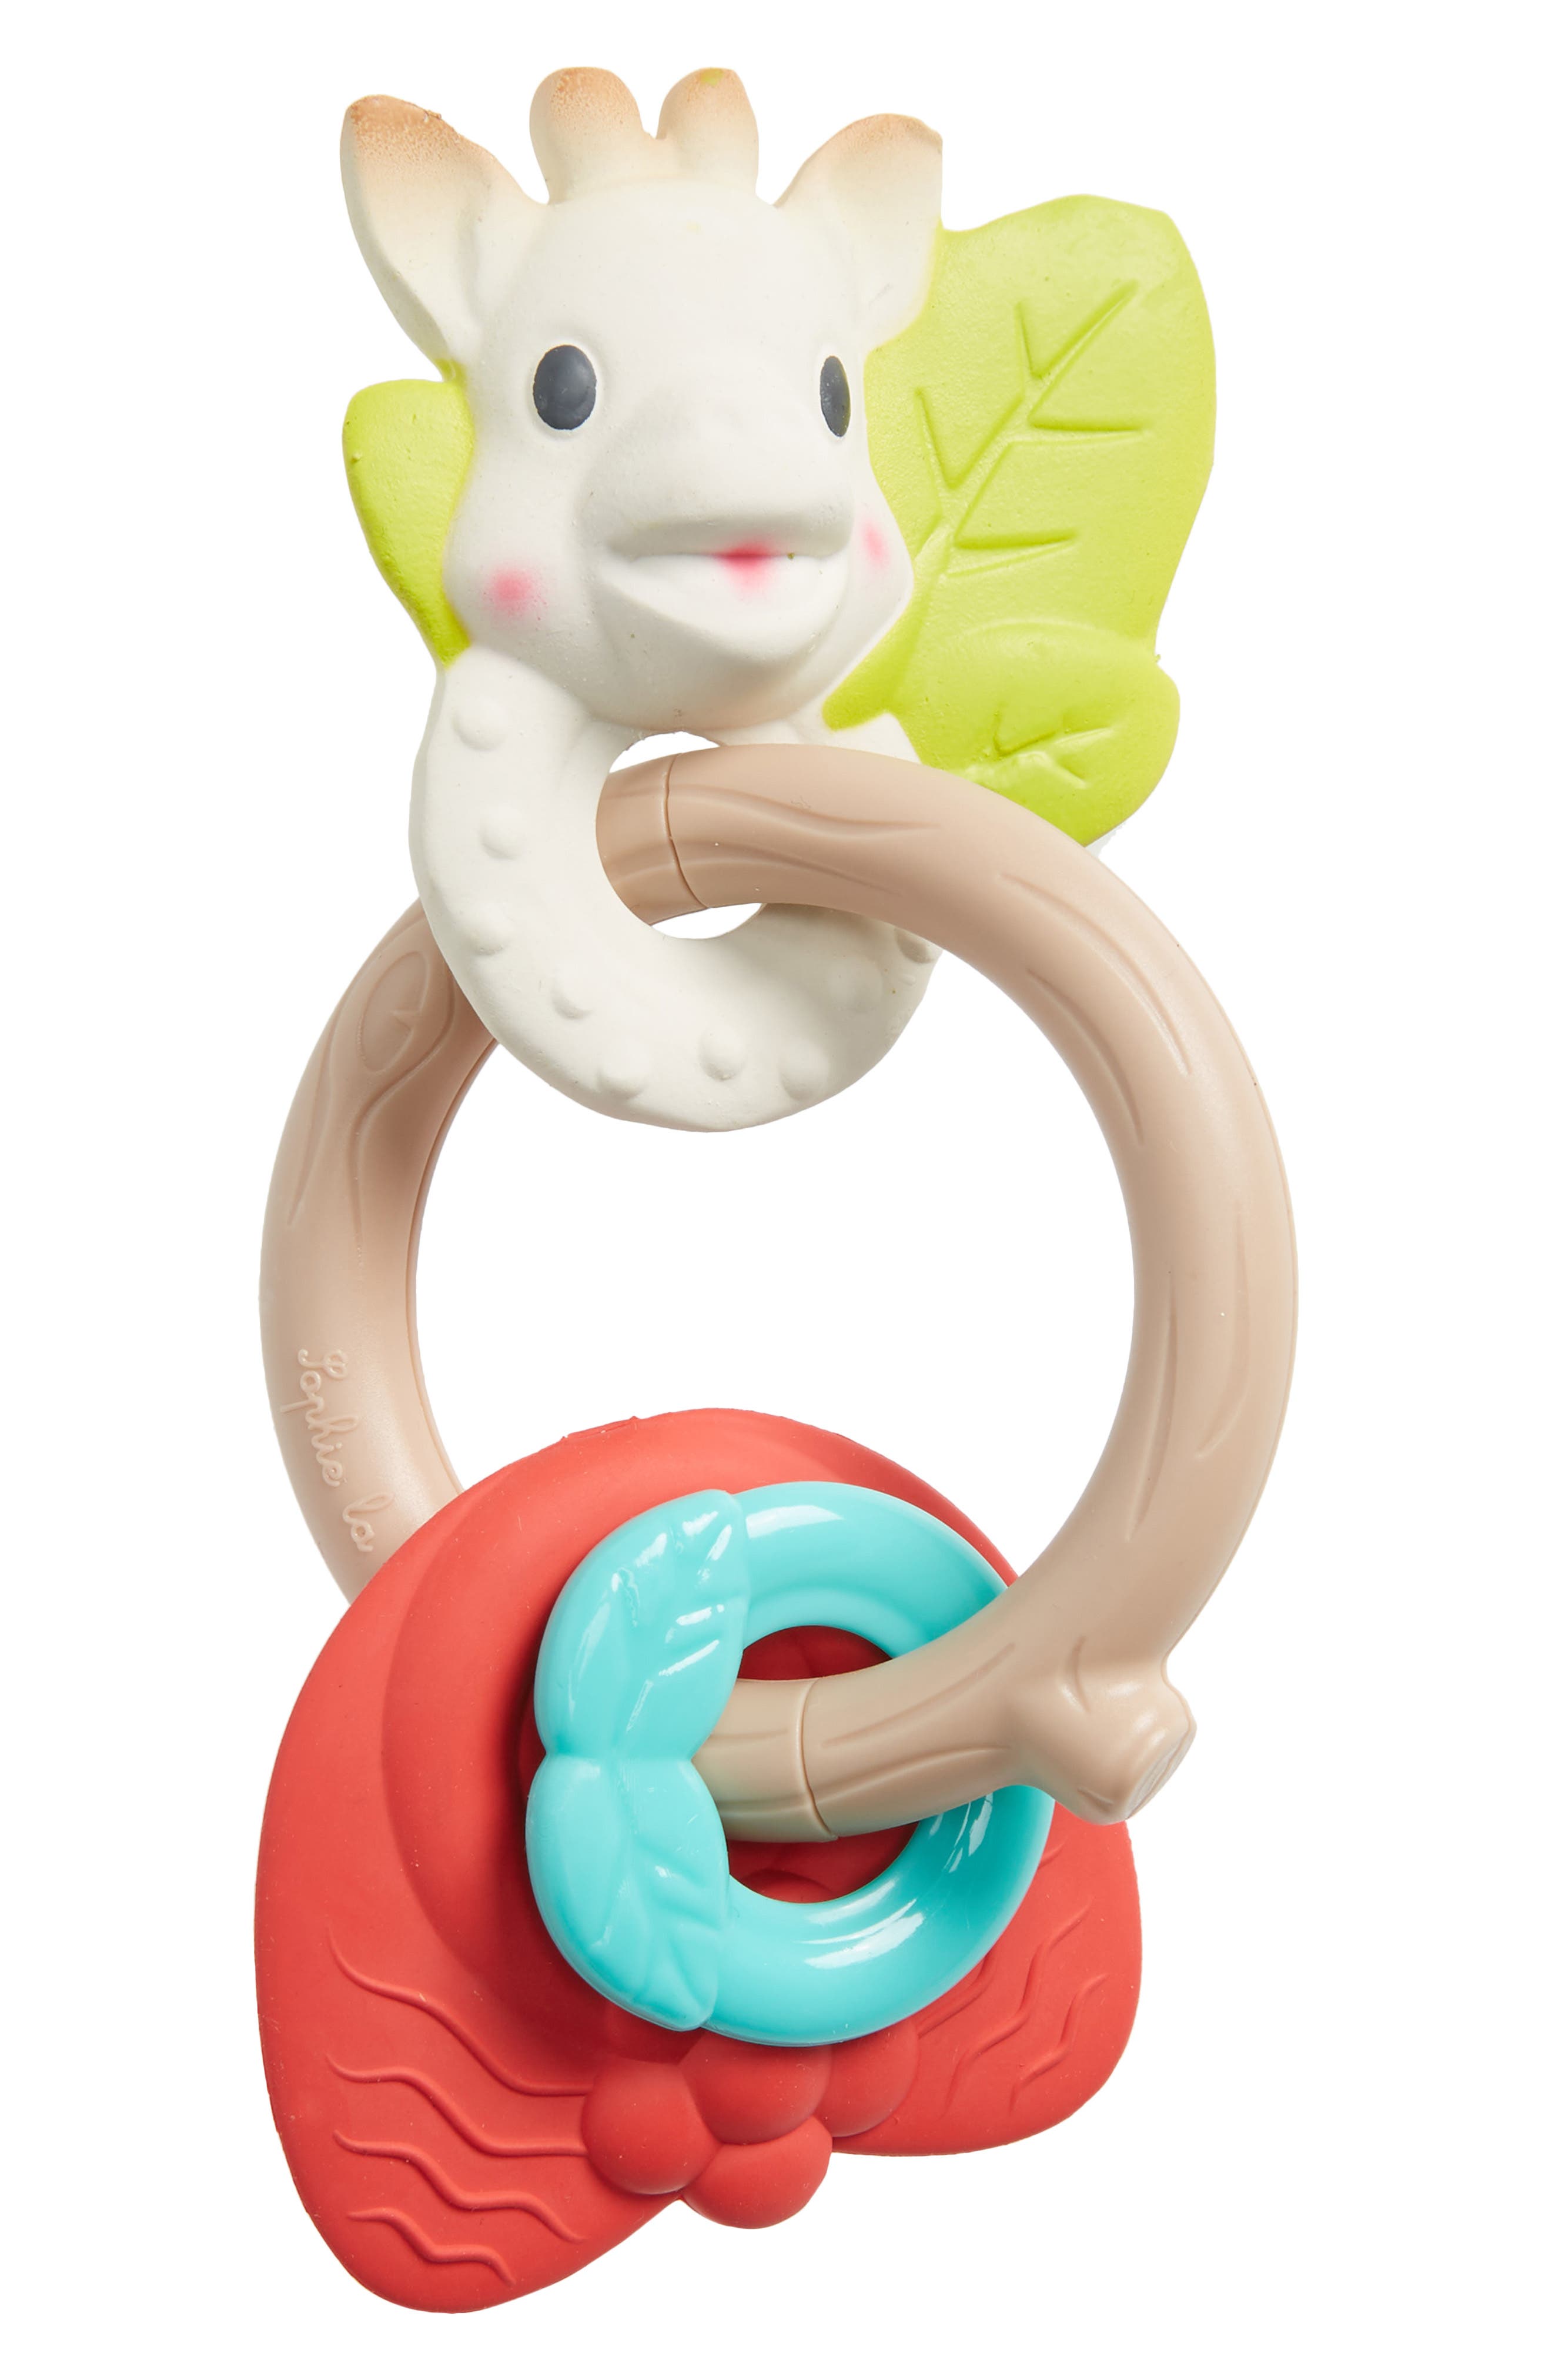 UPC 022000000132 product image for Infant Sophie La Girafe So Pure Teething Rattle, Size One Size - None | upcitemdb.com